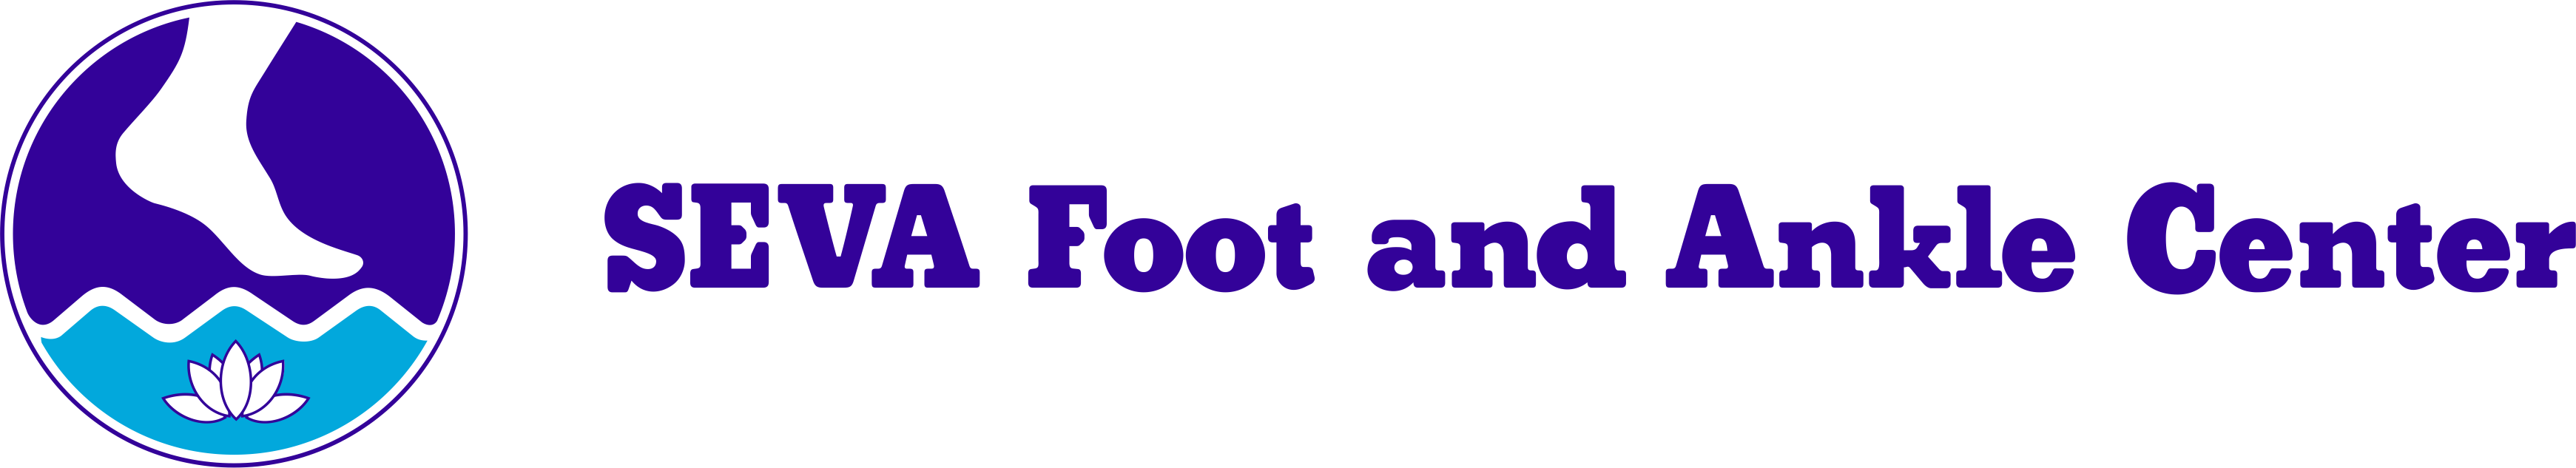 SEVA Foot and Ankle Center